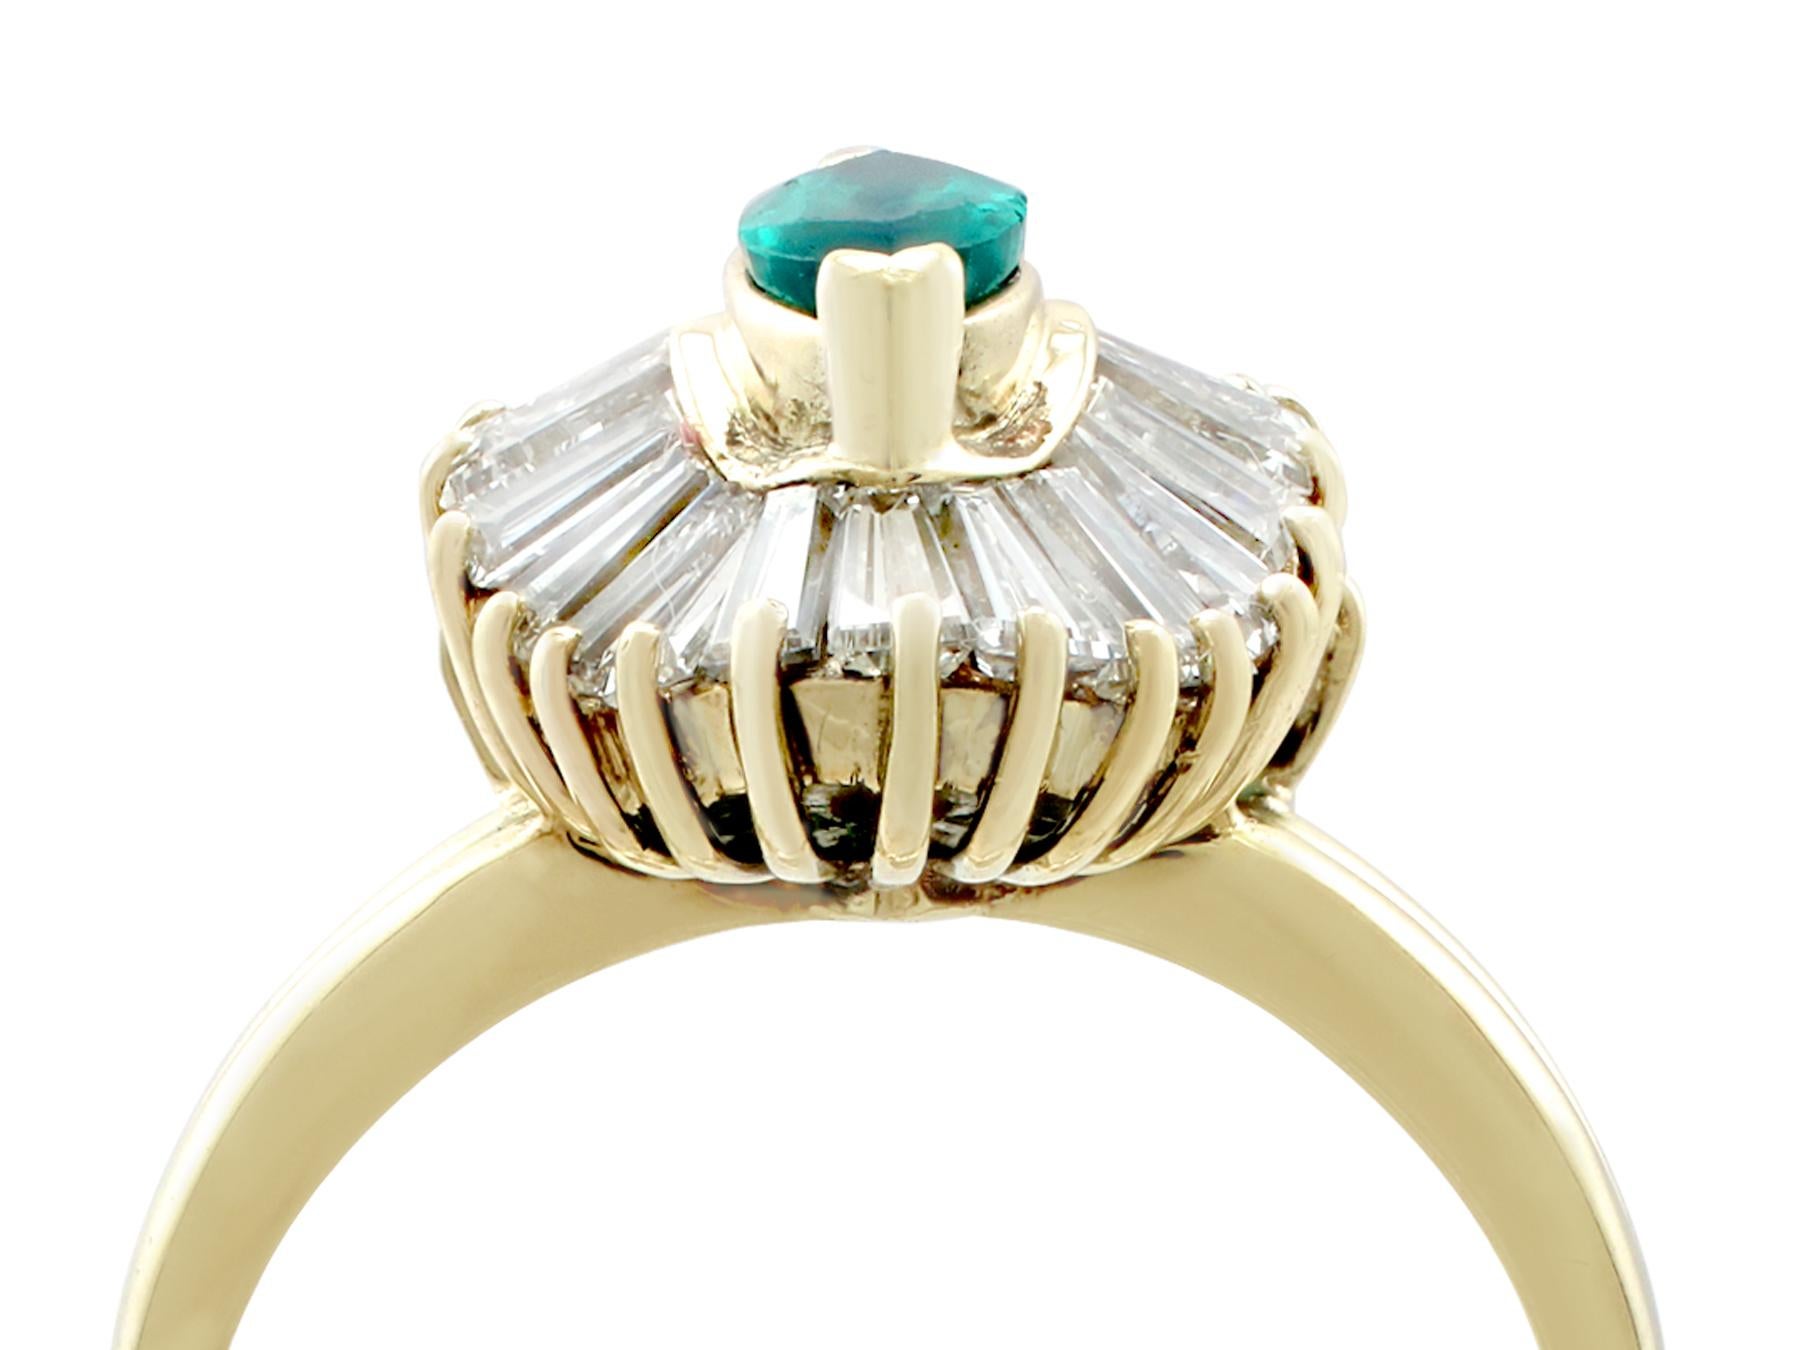 A stunning vintage 0.67 carat emerald and 0.93 carat diamond, 18 carat yellow gold dress ring; part of our diverse vintage jewelry collections

This stunning, fine and impressive emerald and diamond ring has been crafted in 18k yellow gold.

The